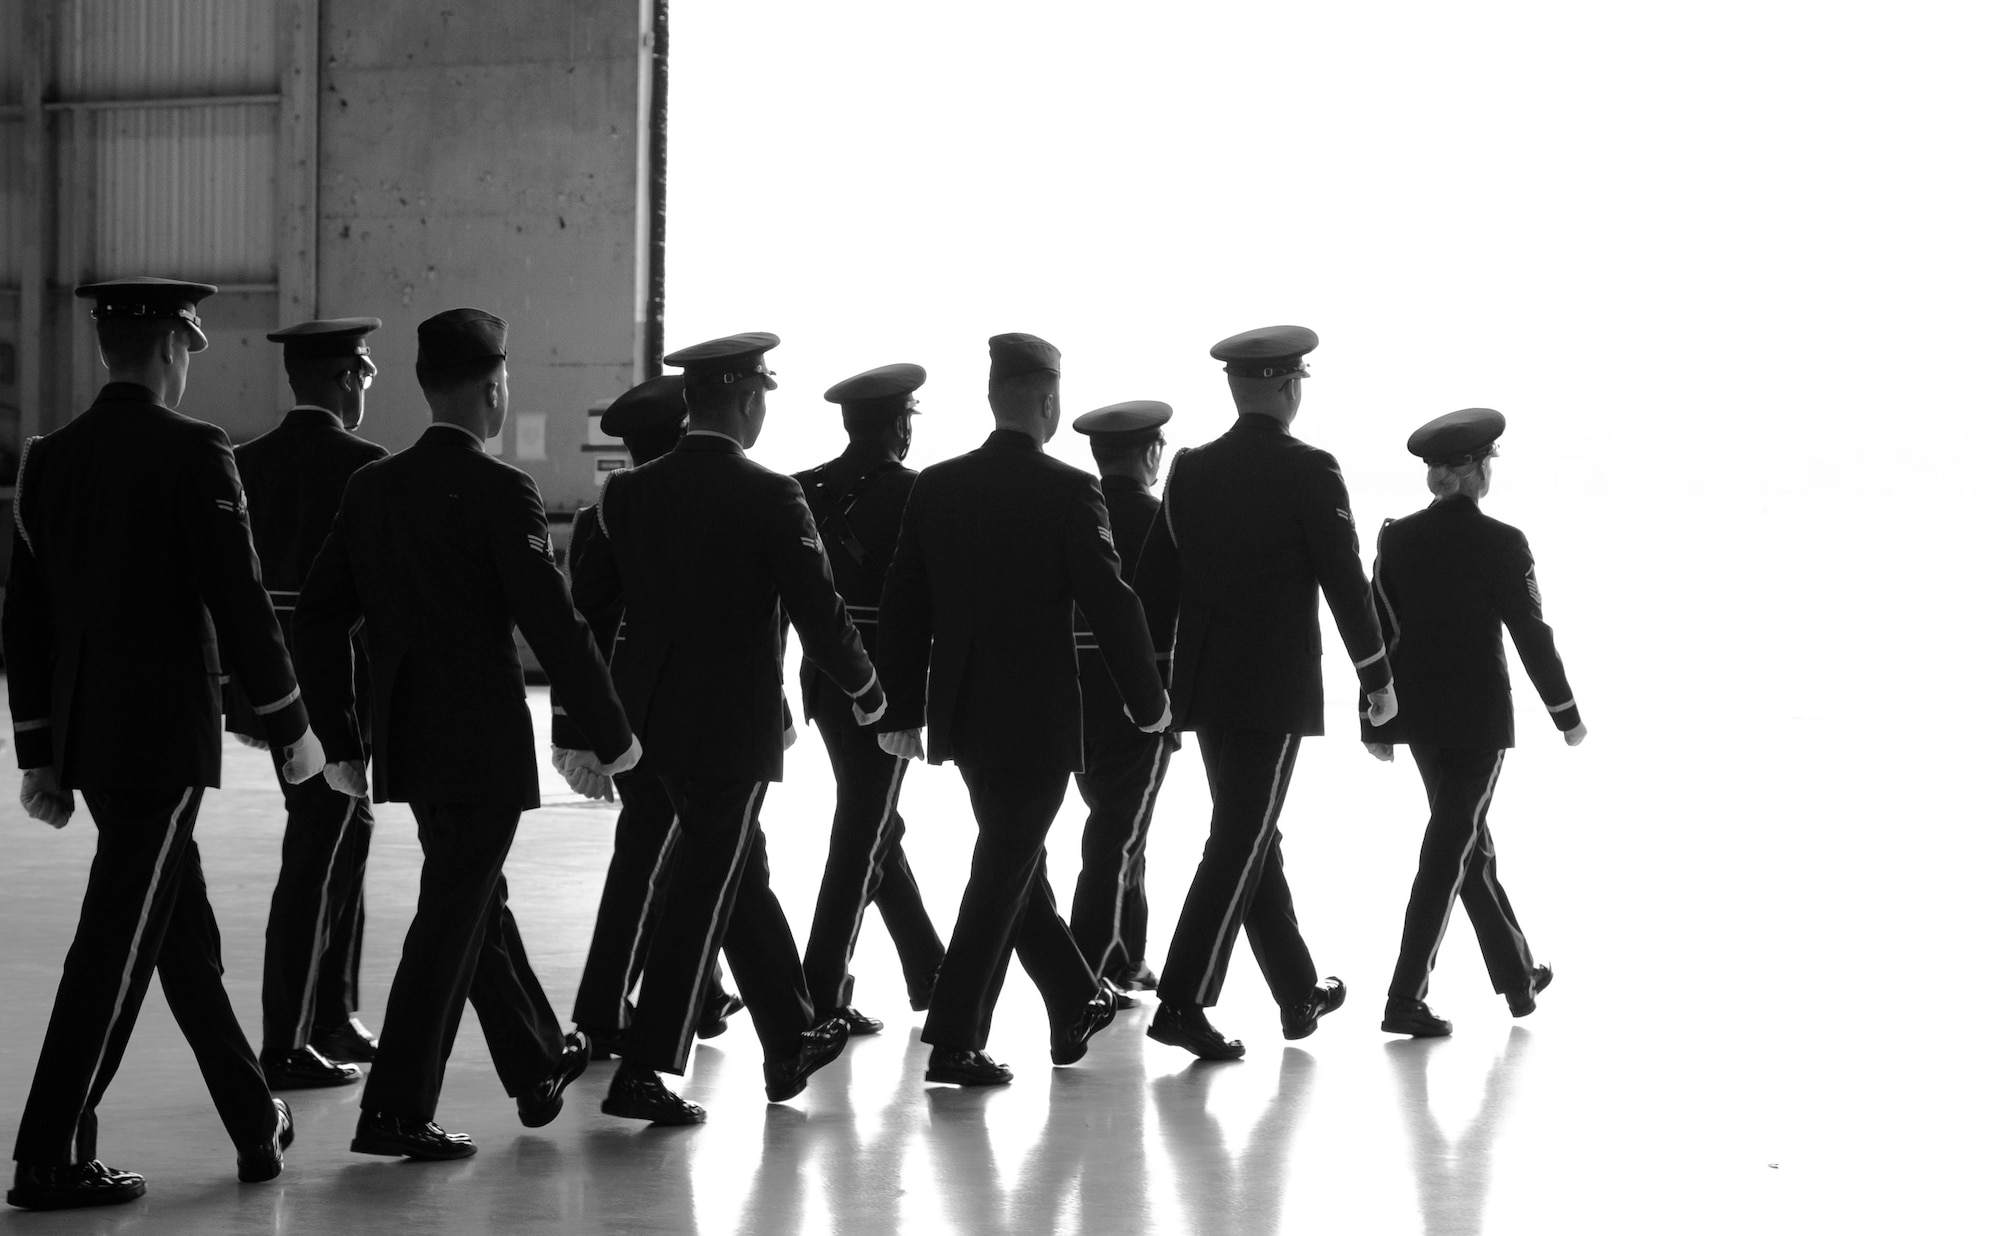 U.S Airmen assigned to the 20th Force Support Squadron Honor Guard march out of Hanger 1200 following a memorial service at Shaw Air Force Base, South Carolina, June 7, 2019.